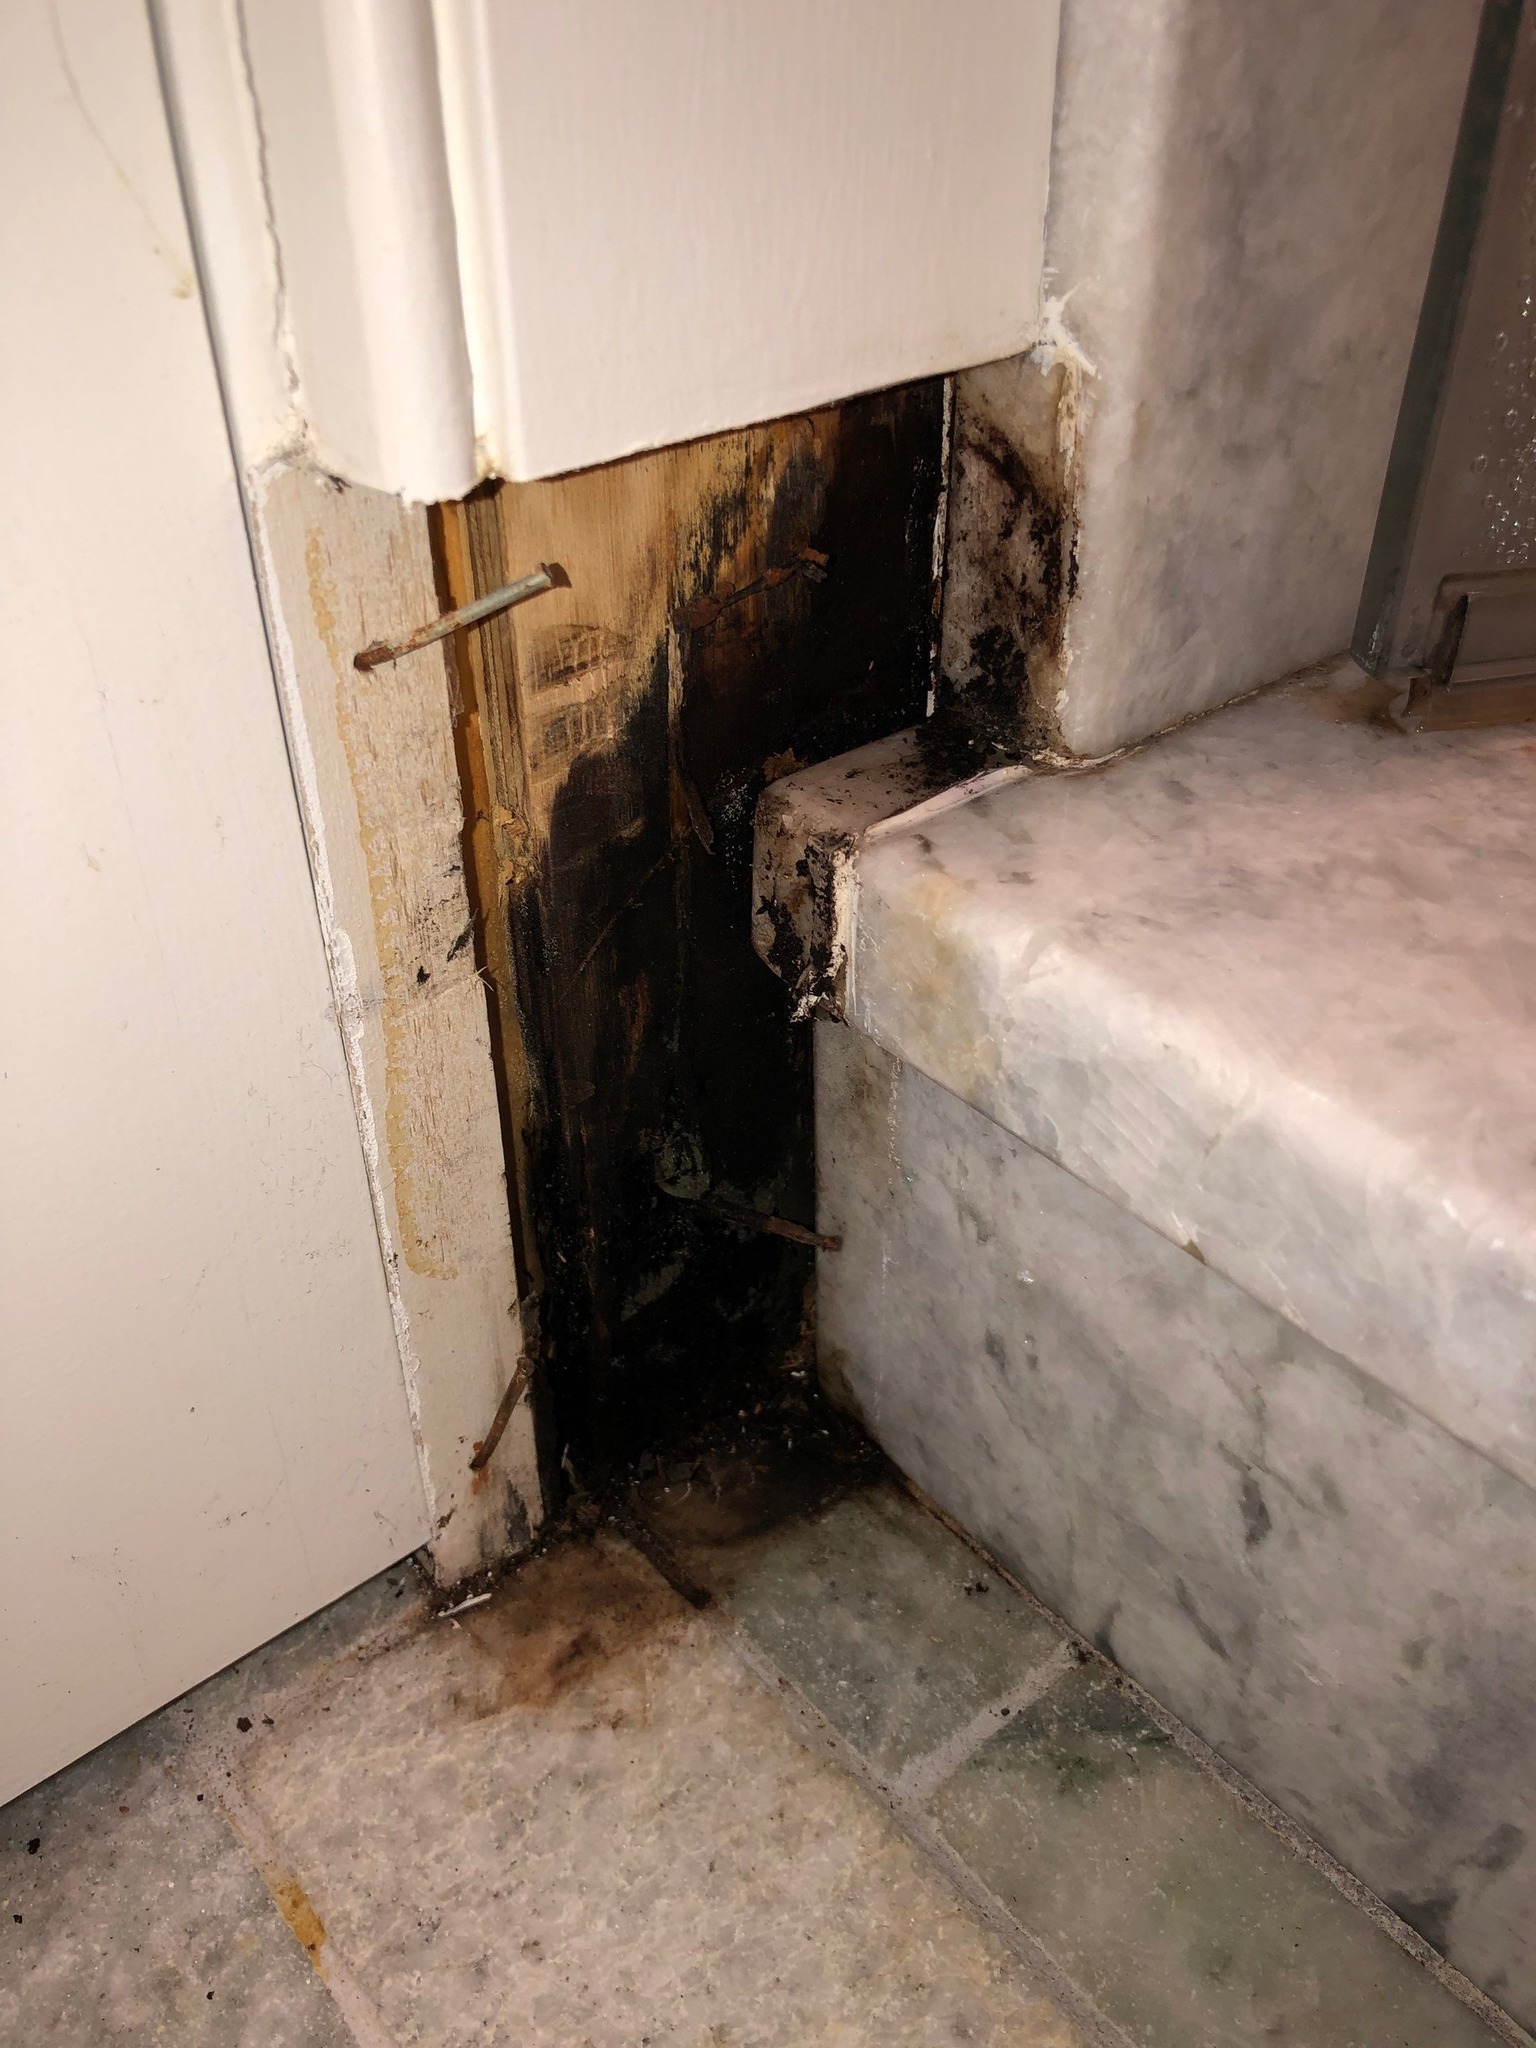 wood rot is a common interior issue